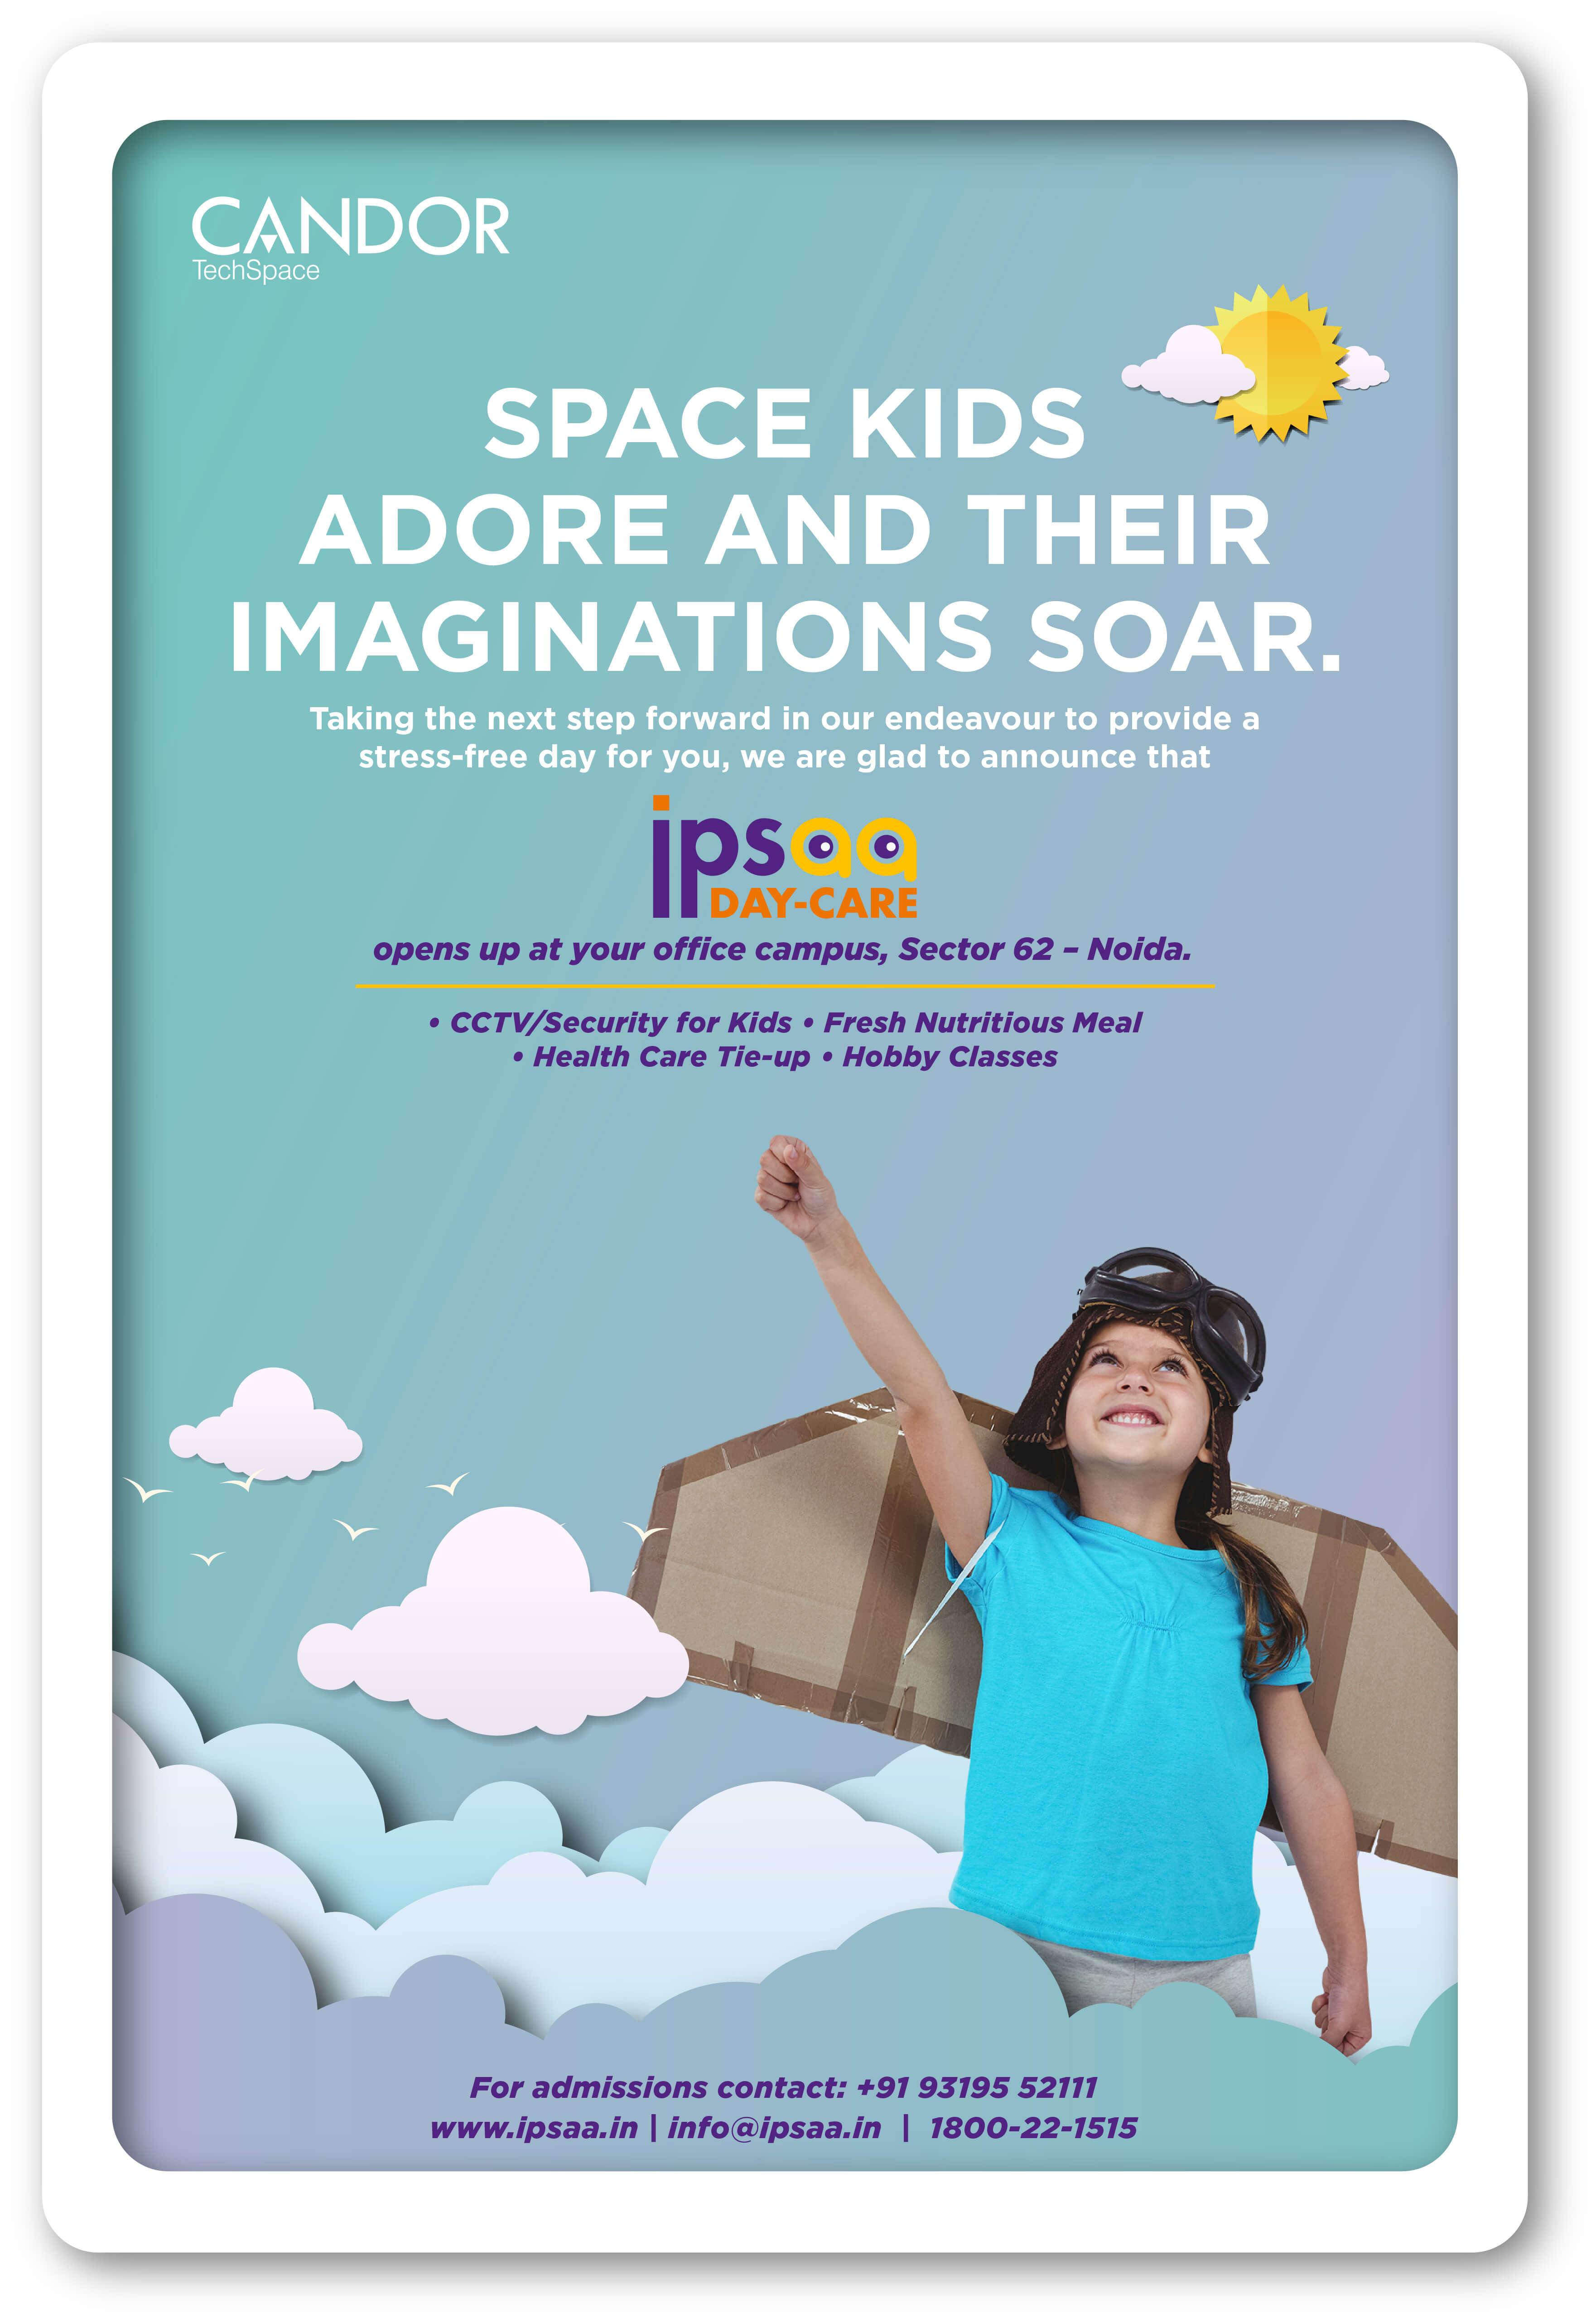 Ipsaa Day-Care opens at Candor TechSpace,  Sector-62 Noida